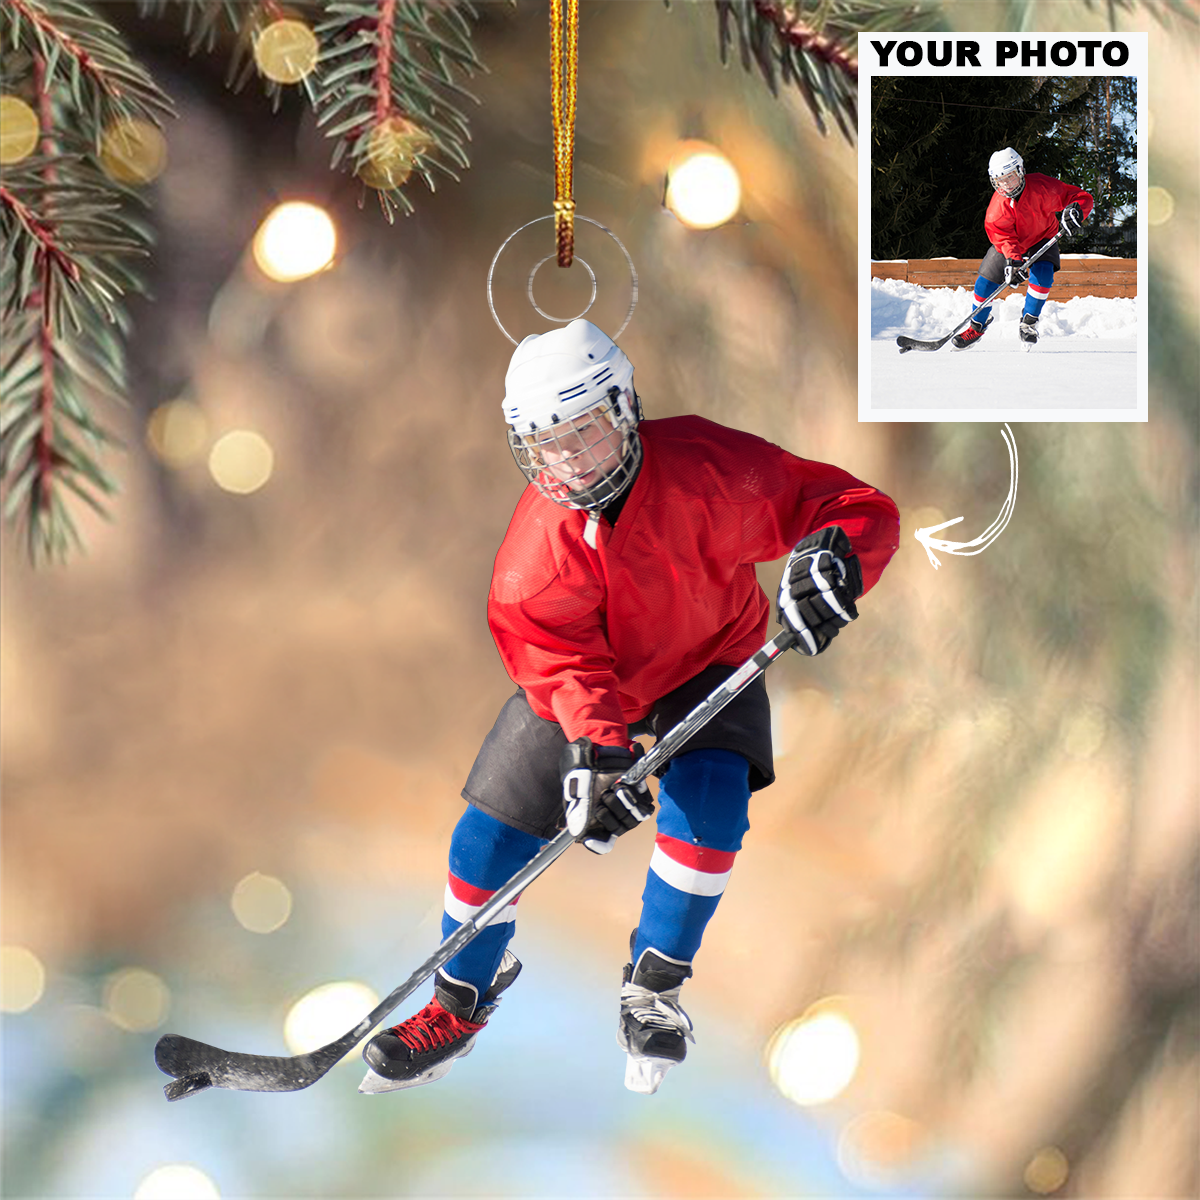 Personalized Photo Mica Ornament - Christmas, Birthday Gift For Family Member, Ice Hockey Lover - Customized Your Photo Ornament